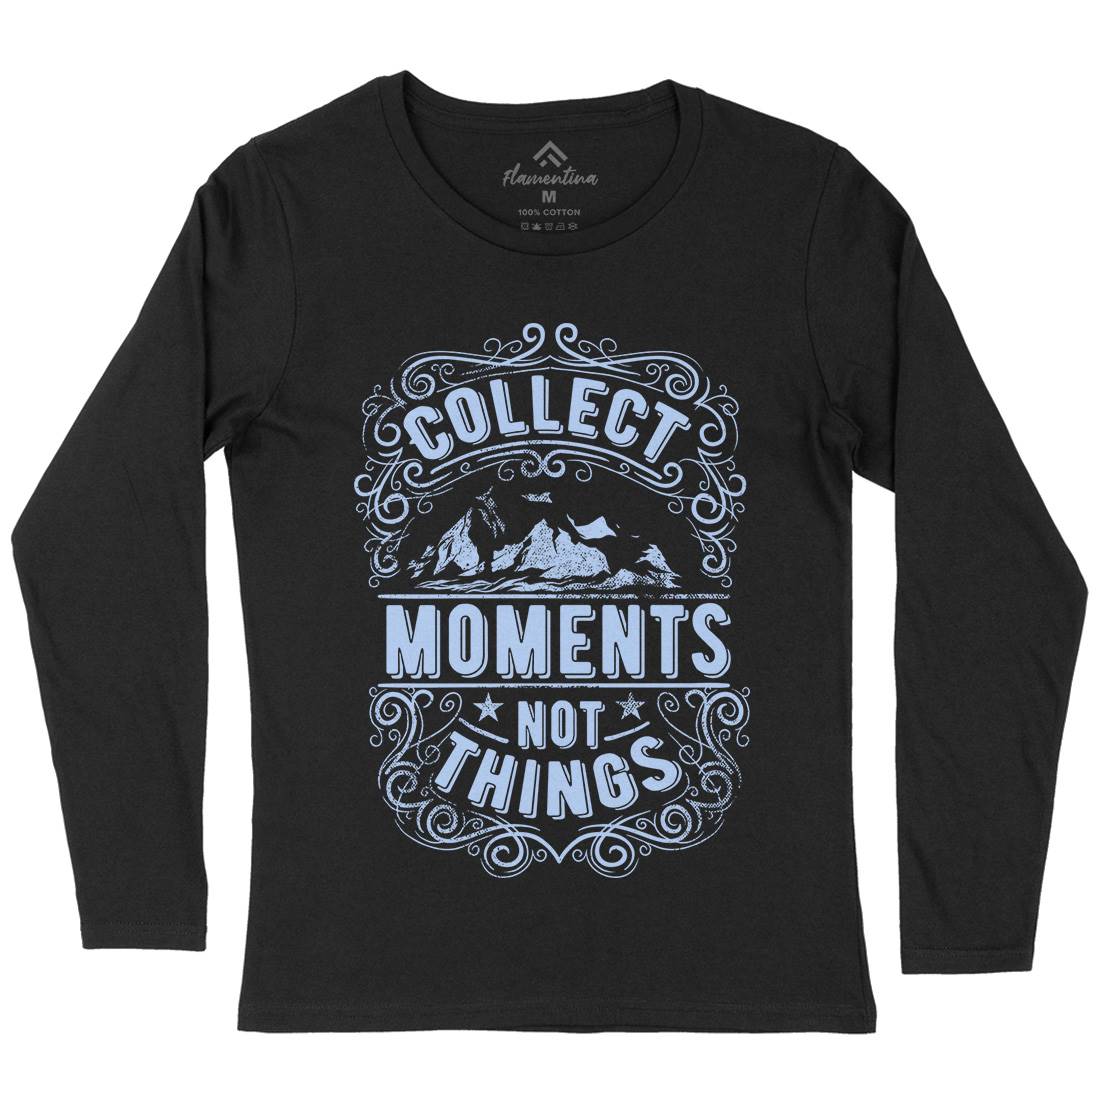 Collect Moments Not Things Womens Long Sleeve T-Shirt Quotes C918